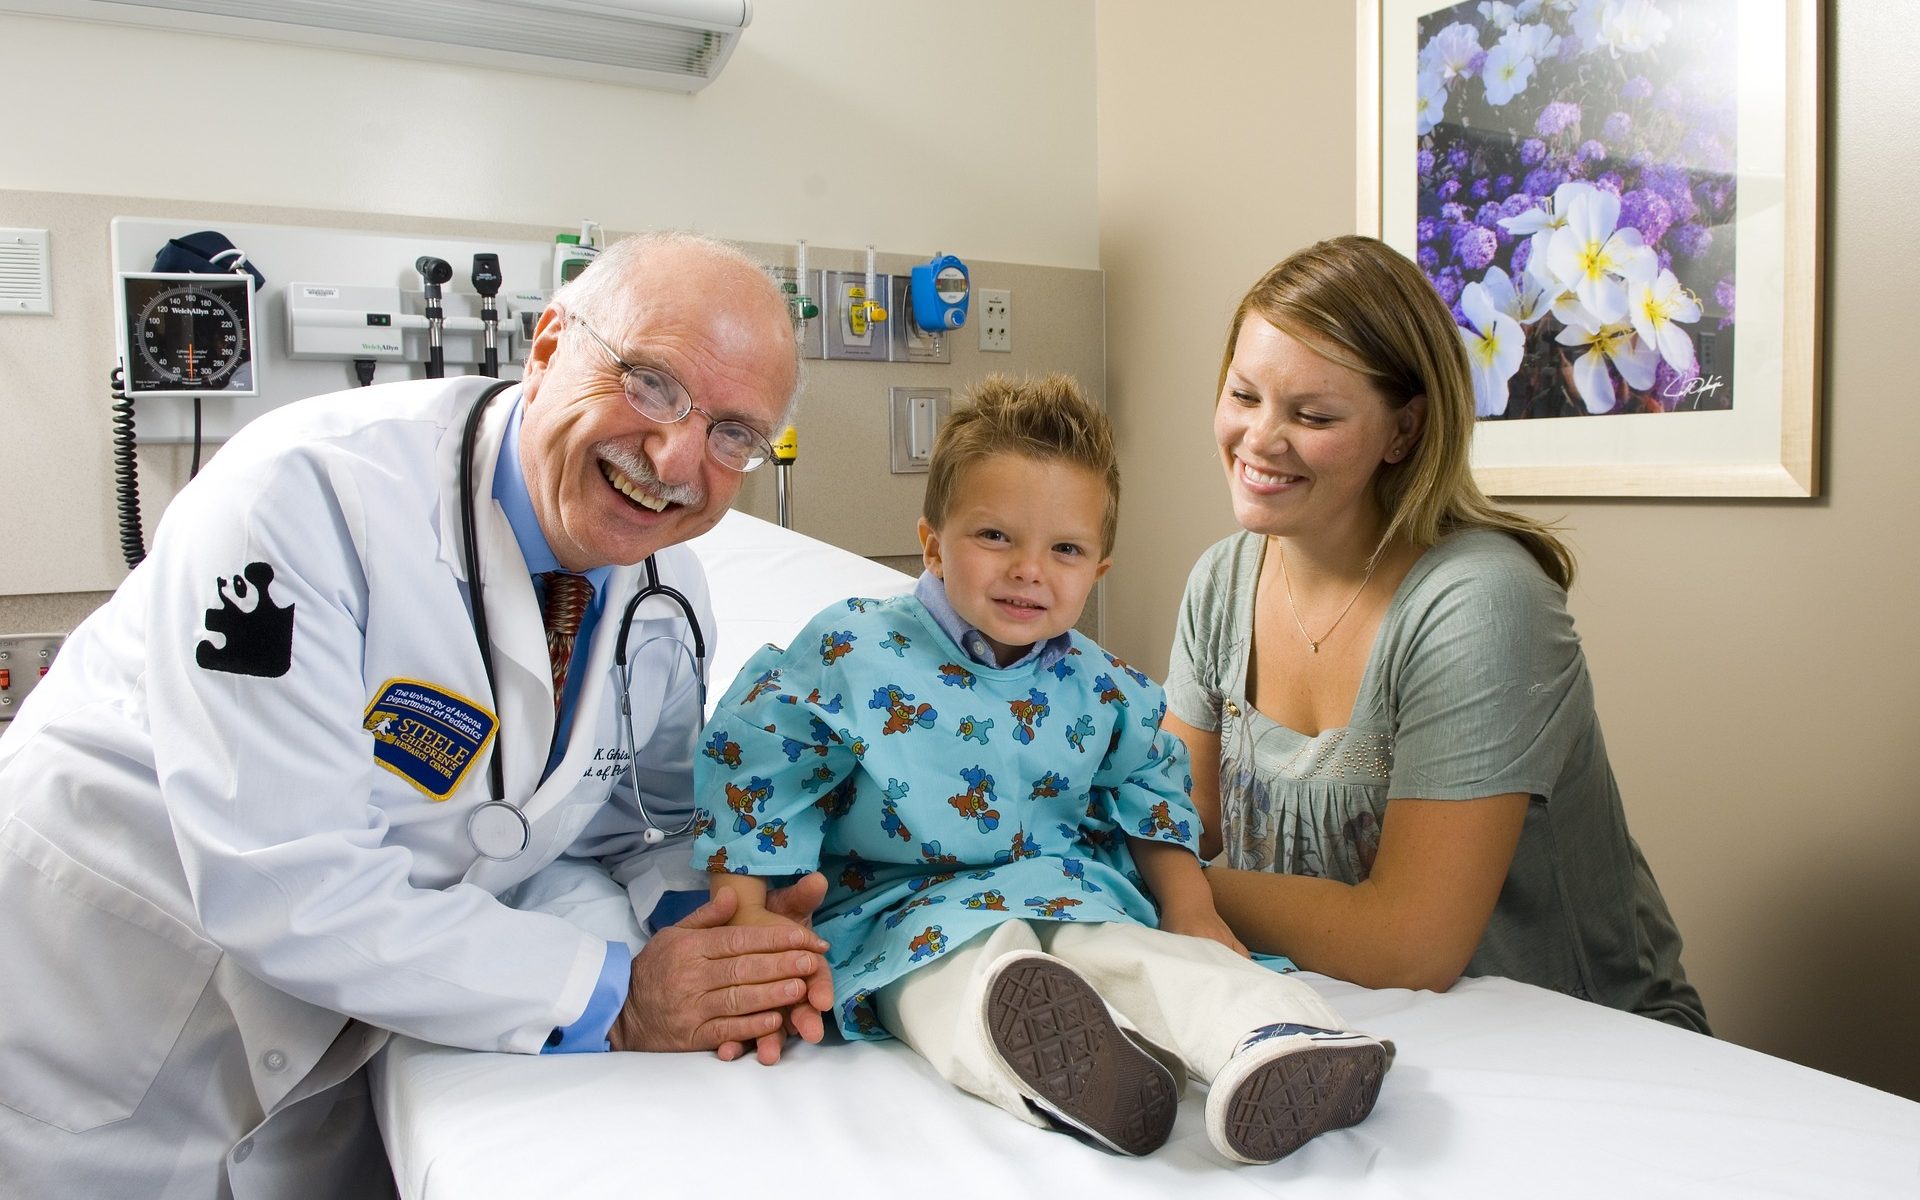 5 Ways to Make Pediatric Patients Feel Comfortable - Next ...